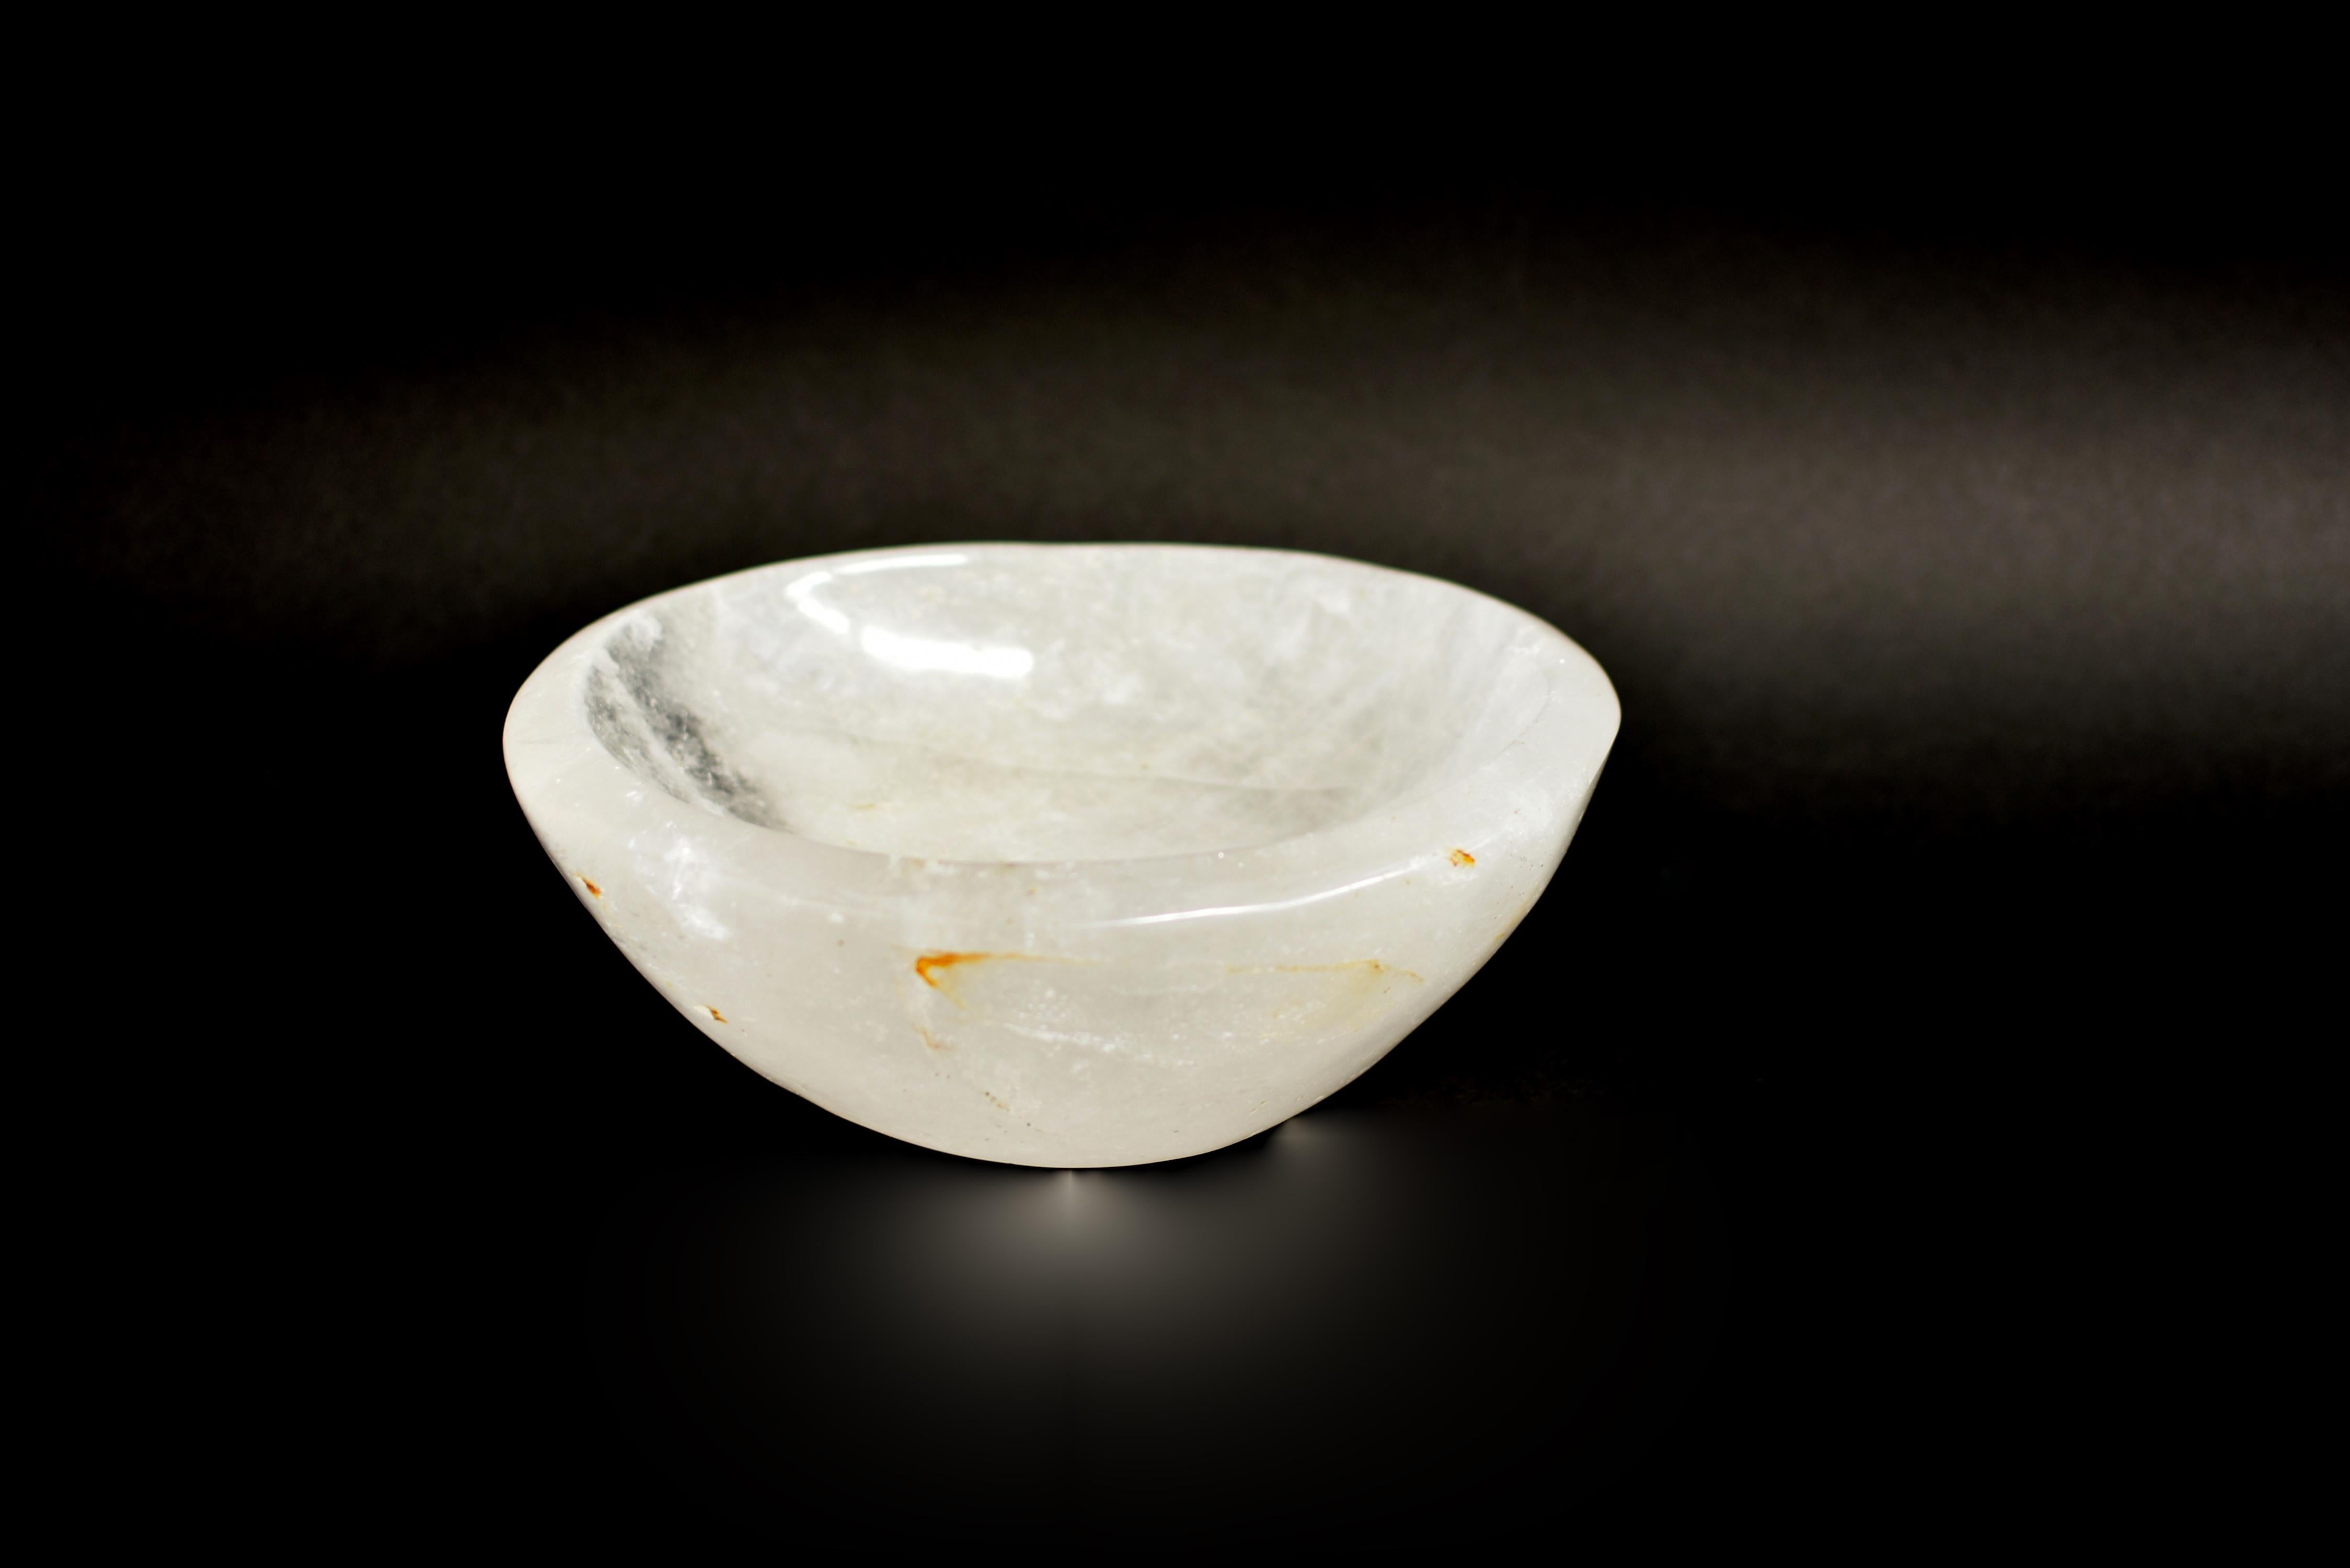 A beautiful all natural rock crystal bowl, hand carved and polished. Fine AAA gemstone grade genuine rock crystal with rare gold rutile. Of organic form with beautiful translucency and iridescence. A stunning objet d'art for interior design and